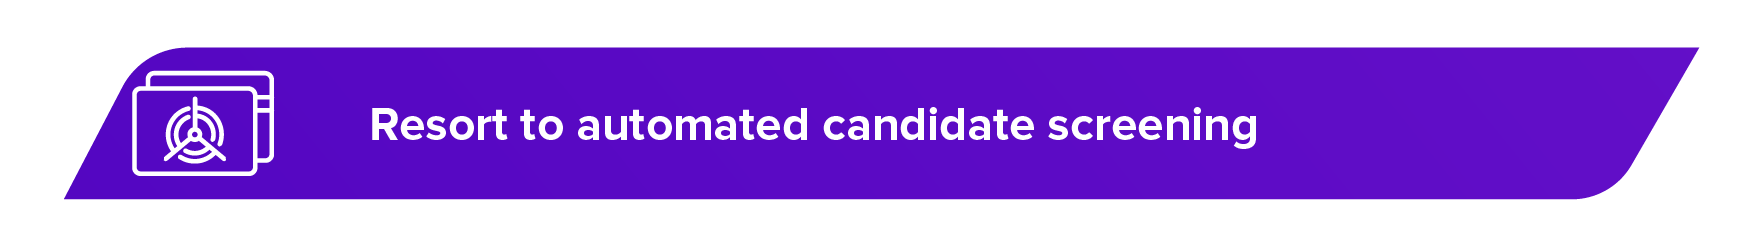 auto candidate screening banner